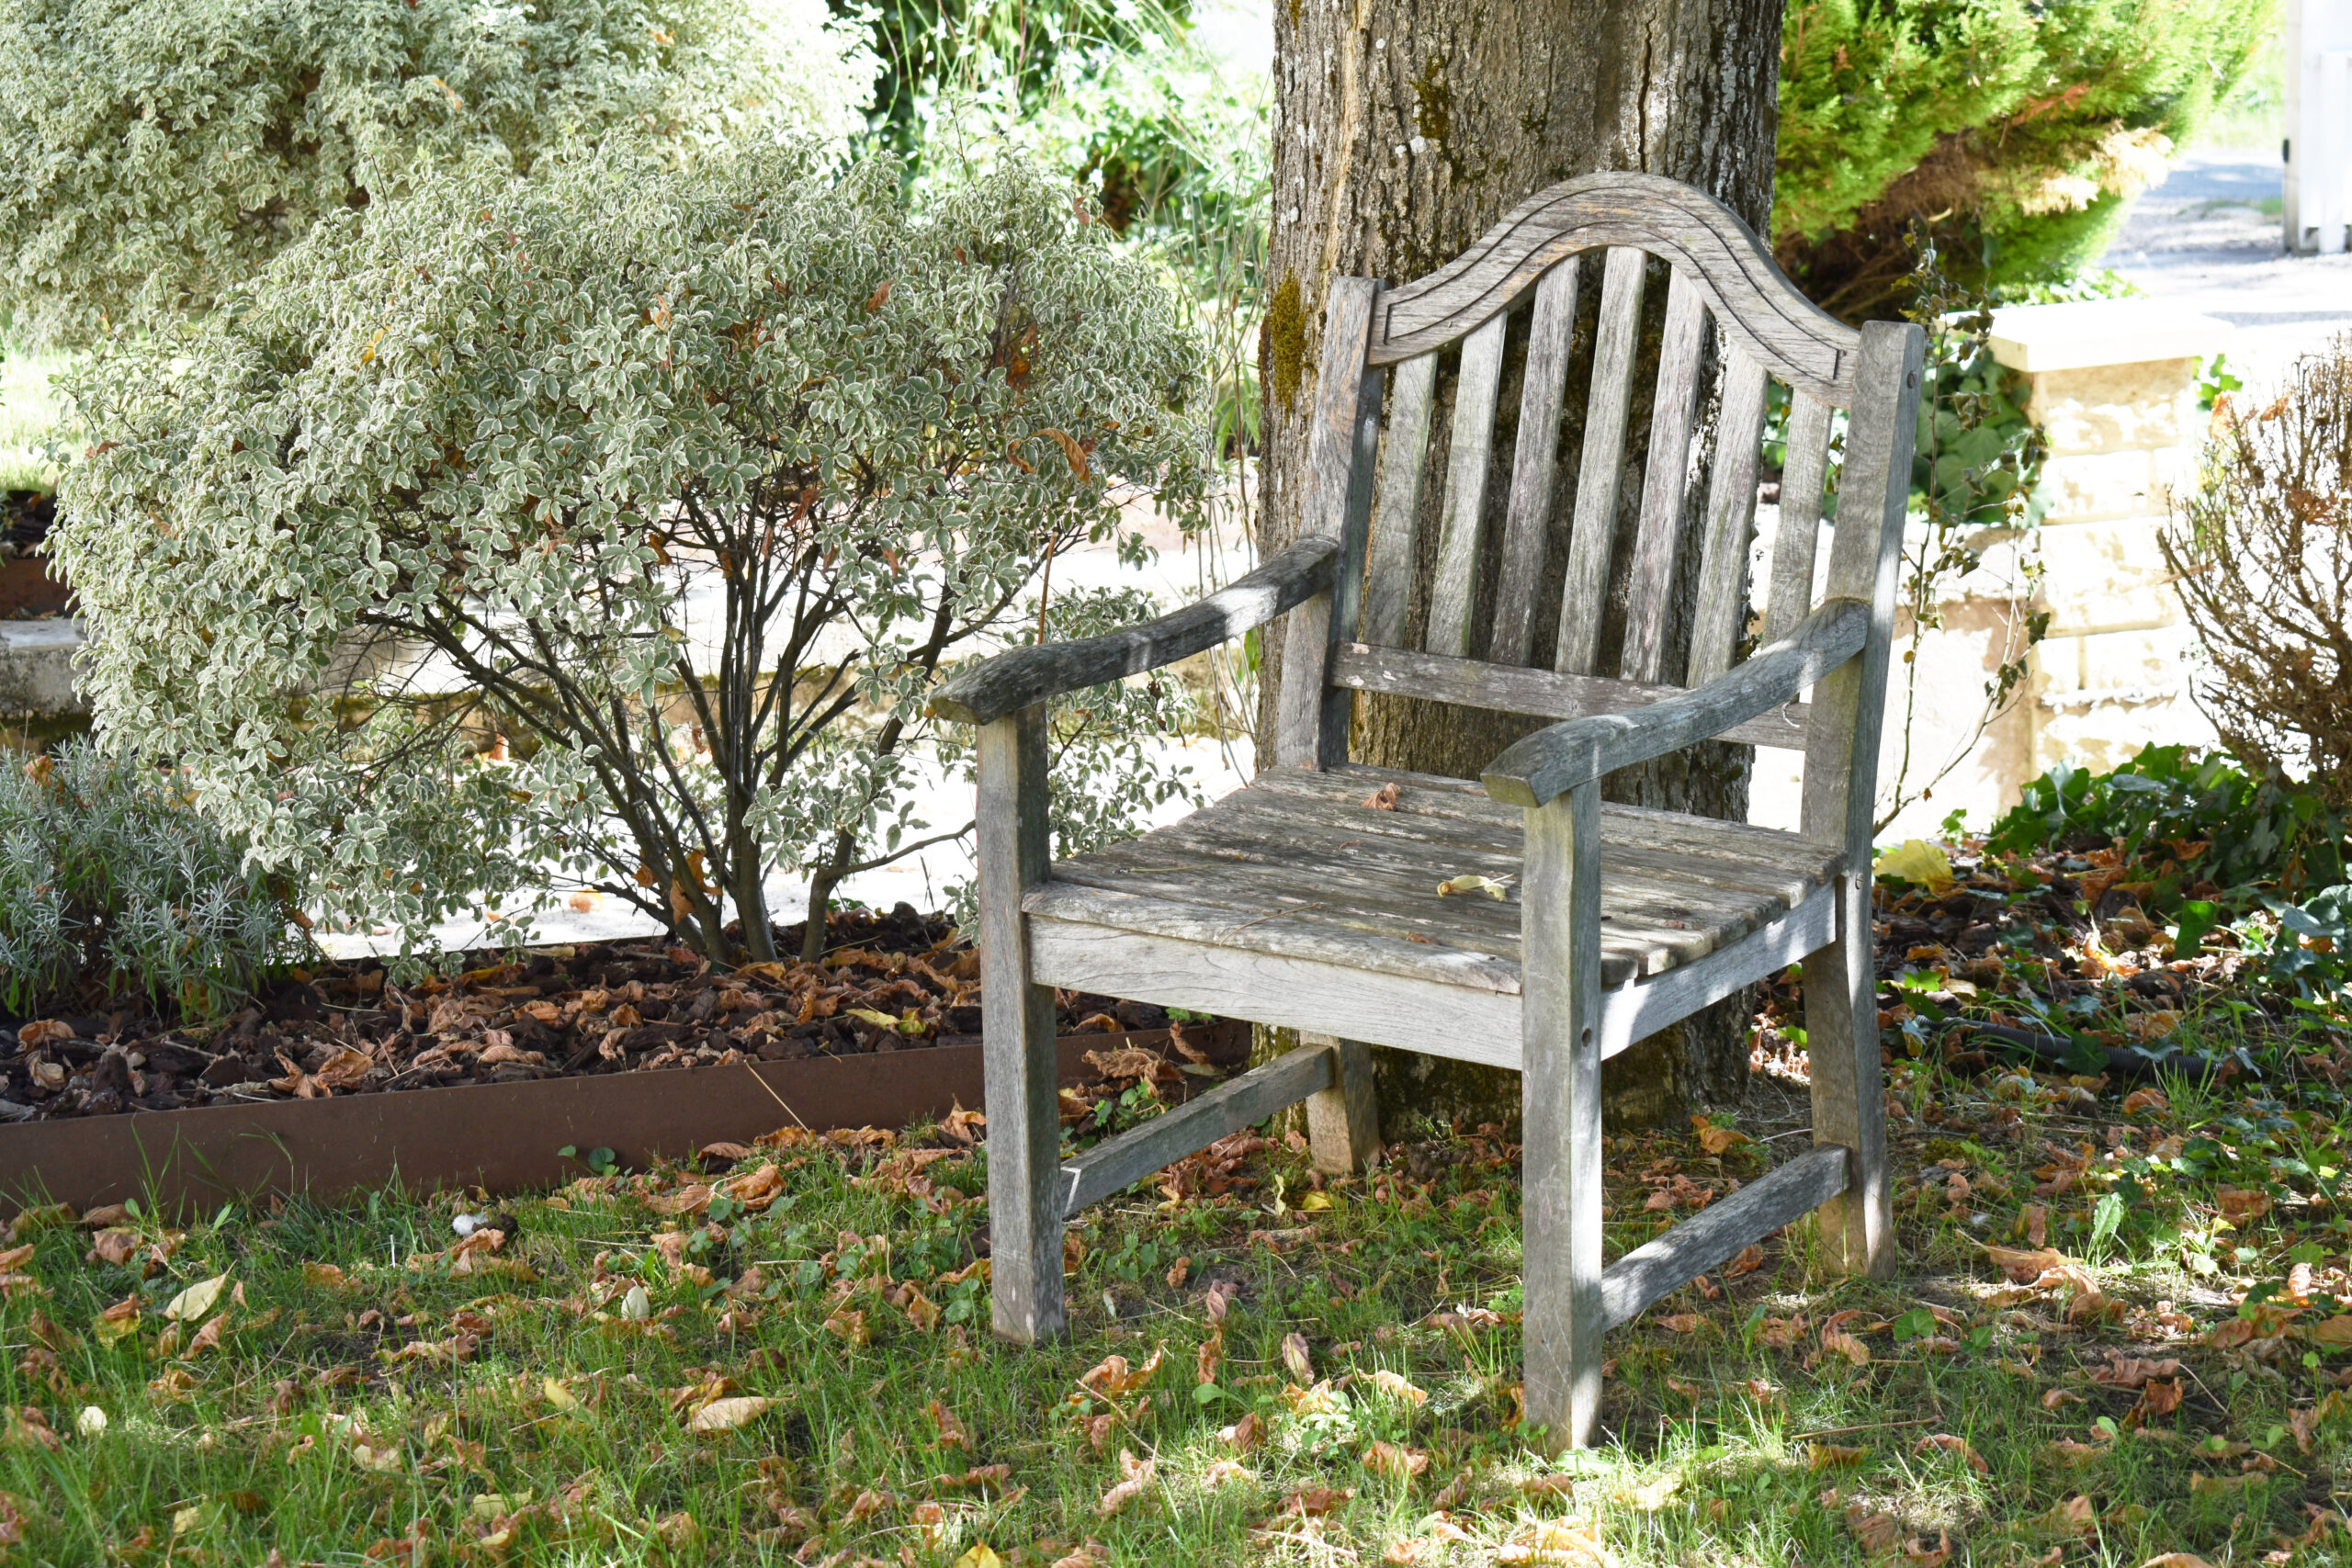 Chair under a tree